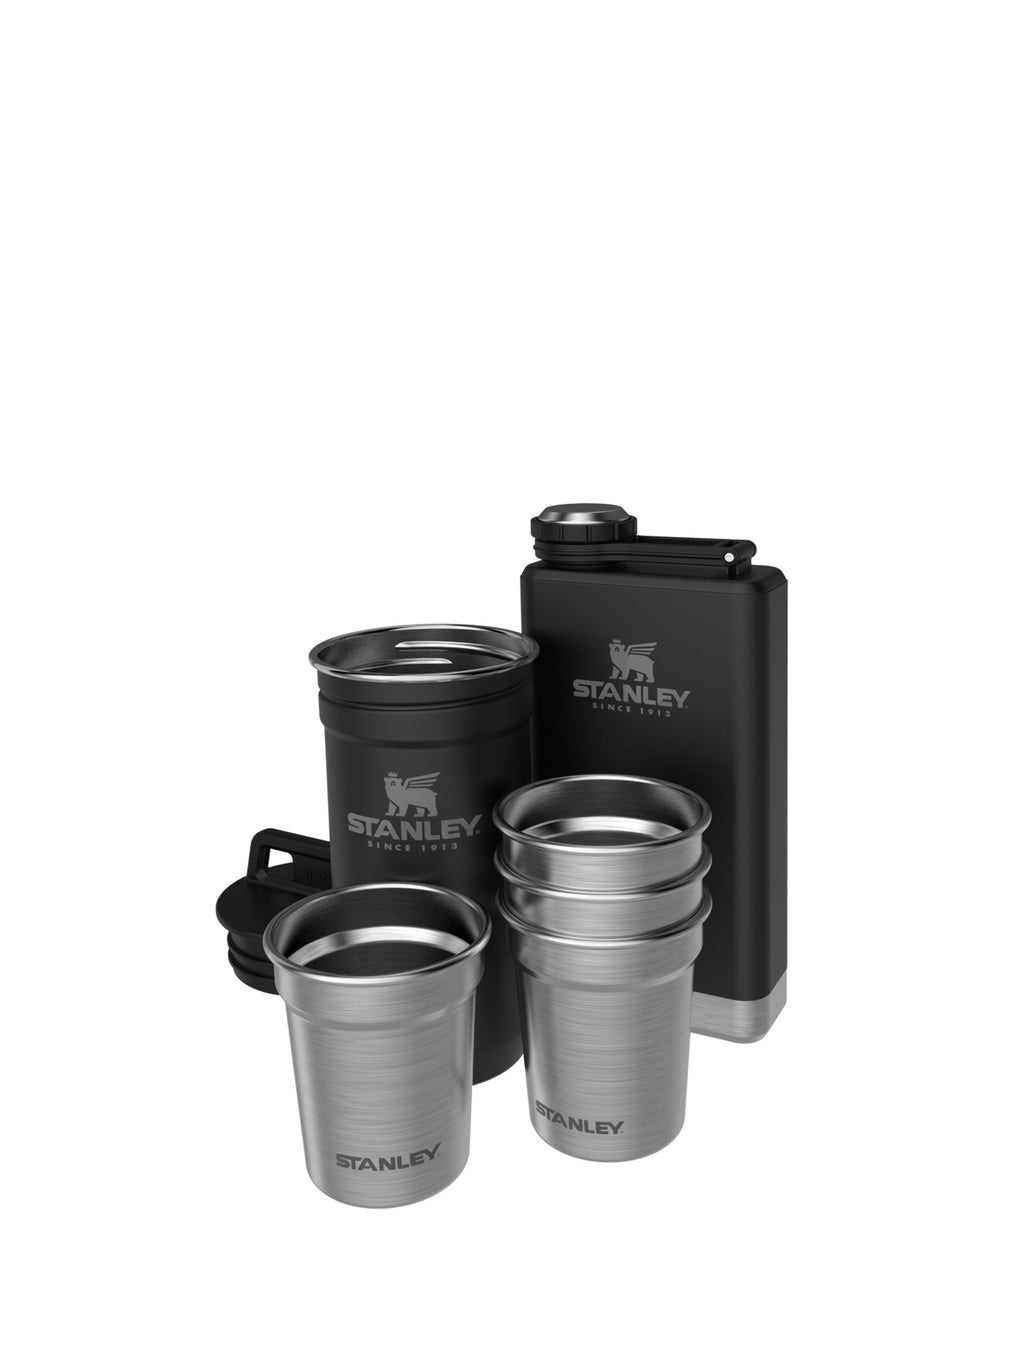 The Pre-Party Shot Glass + Flask Set Set of 4 M.B – Blancsom